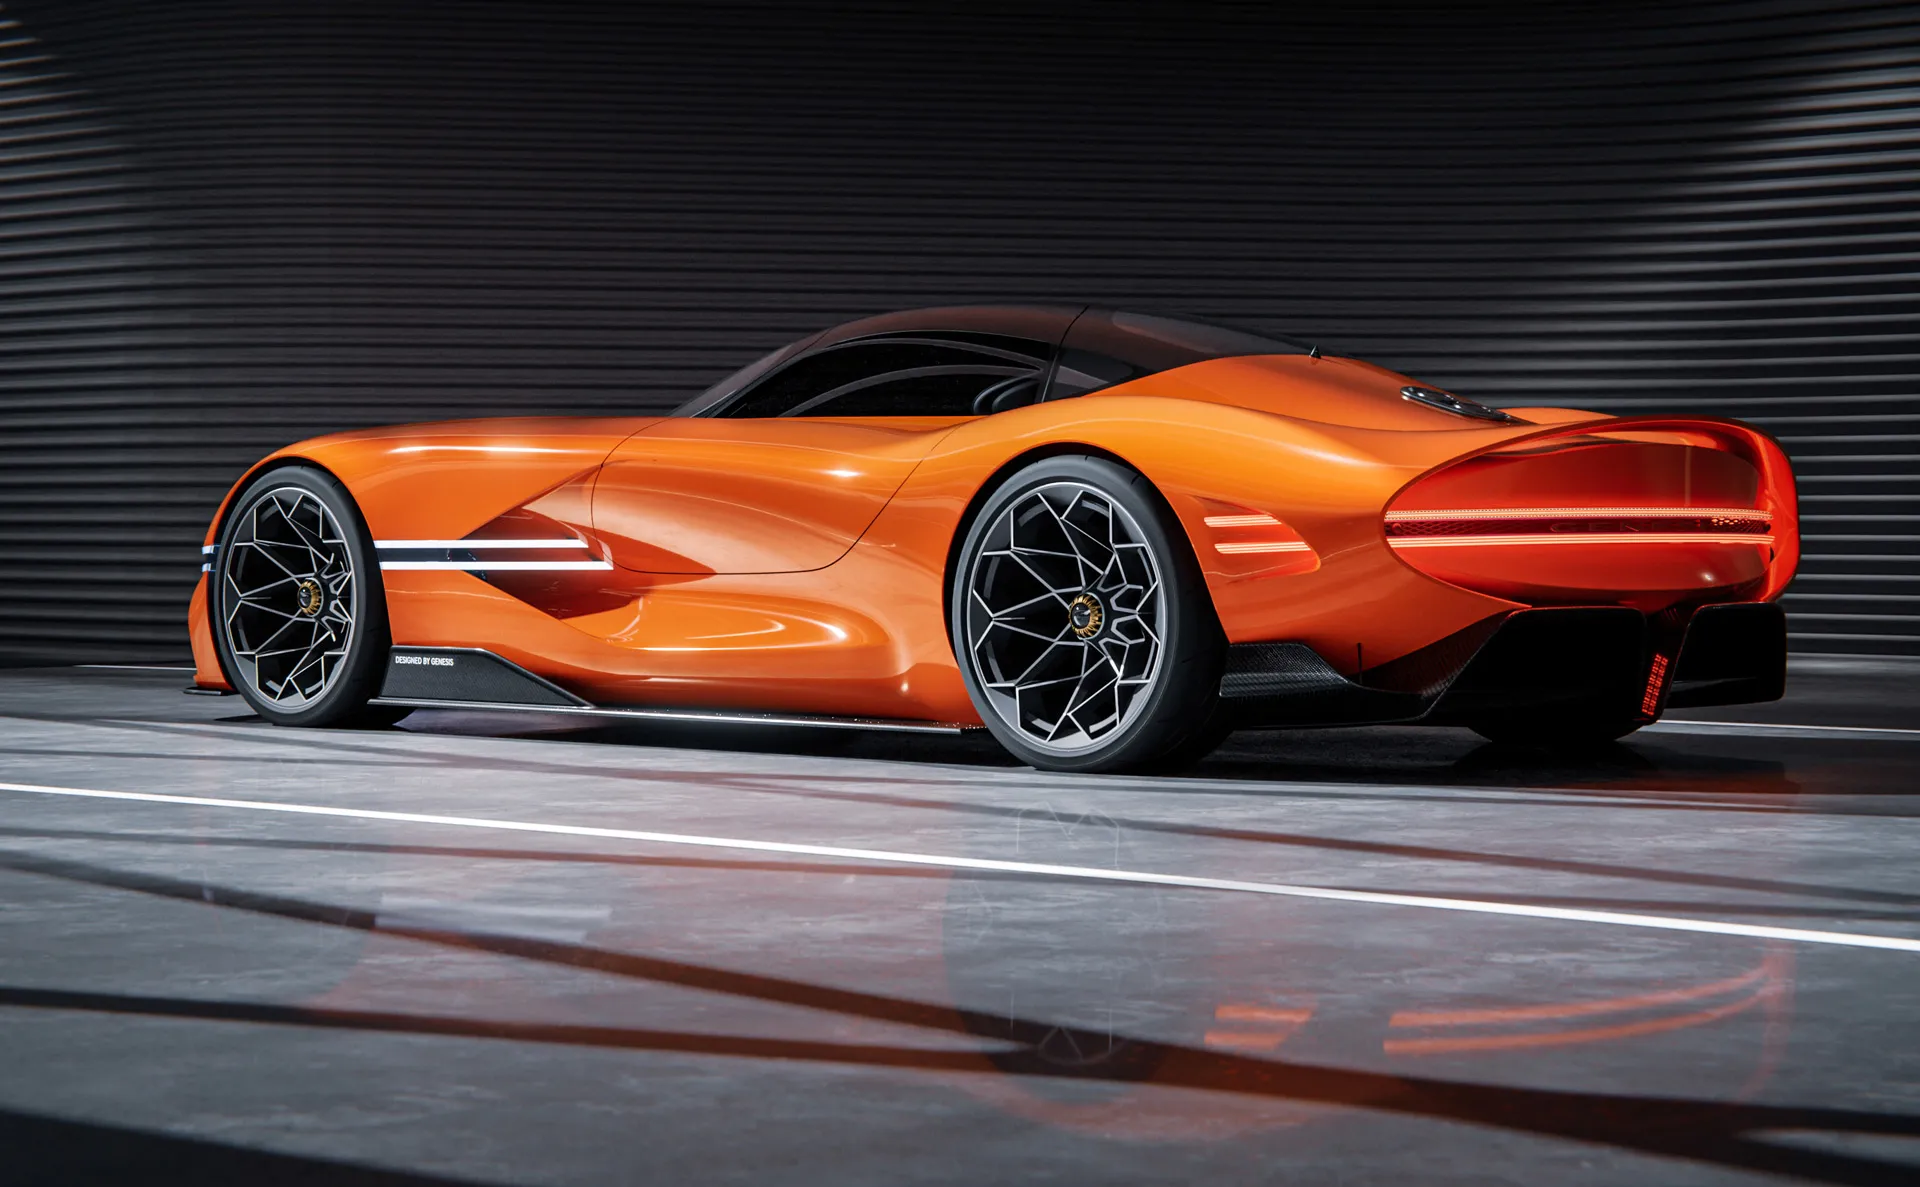 genesis rolls out v 6 hybrid hypercar concept packing 1071 hp 100908766 h